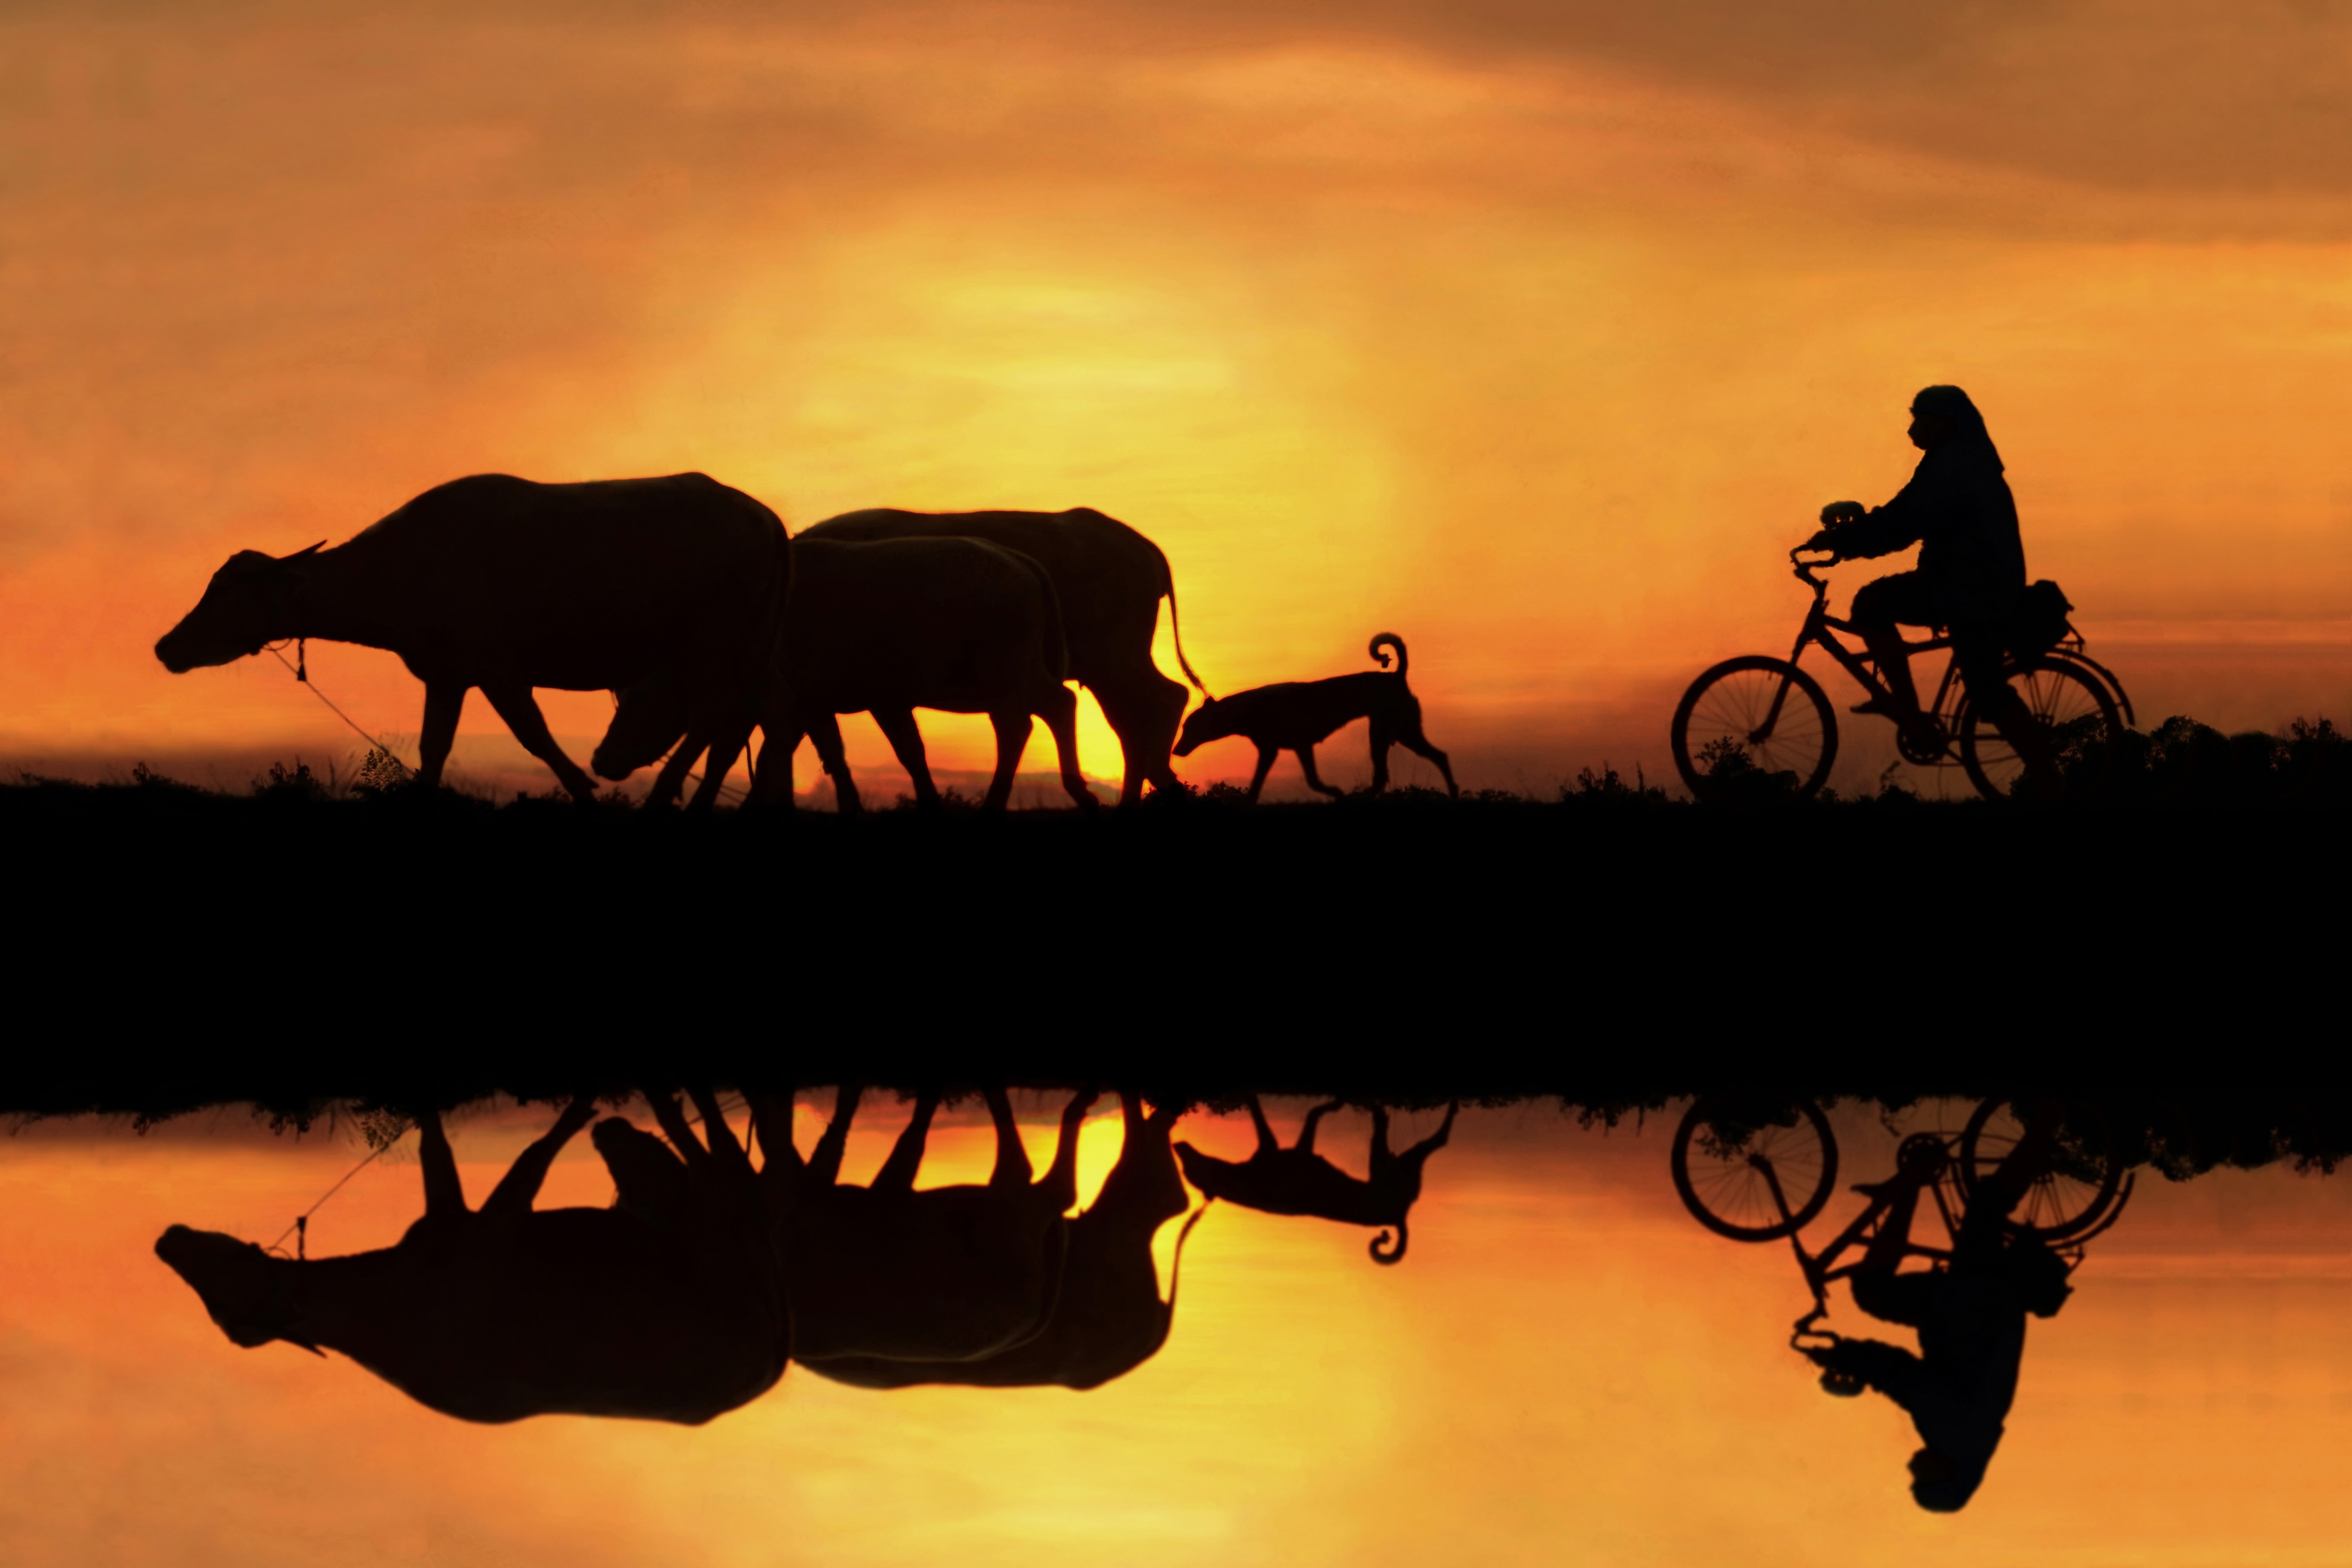 Cycling,BicycleS,cenics,Sunset,Lake,Reflection,People,Two ,People,Nature,Silhouette,Thailand,Atmospheric ,MoodBeauty ,In NatureCloud - SkyColor ,Image,Horizontal,On The Move,Outdoors,Photography,Sky,Sunlight,Togetherness,Transportatio, sarawut intarob